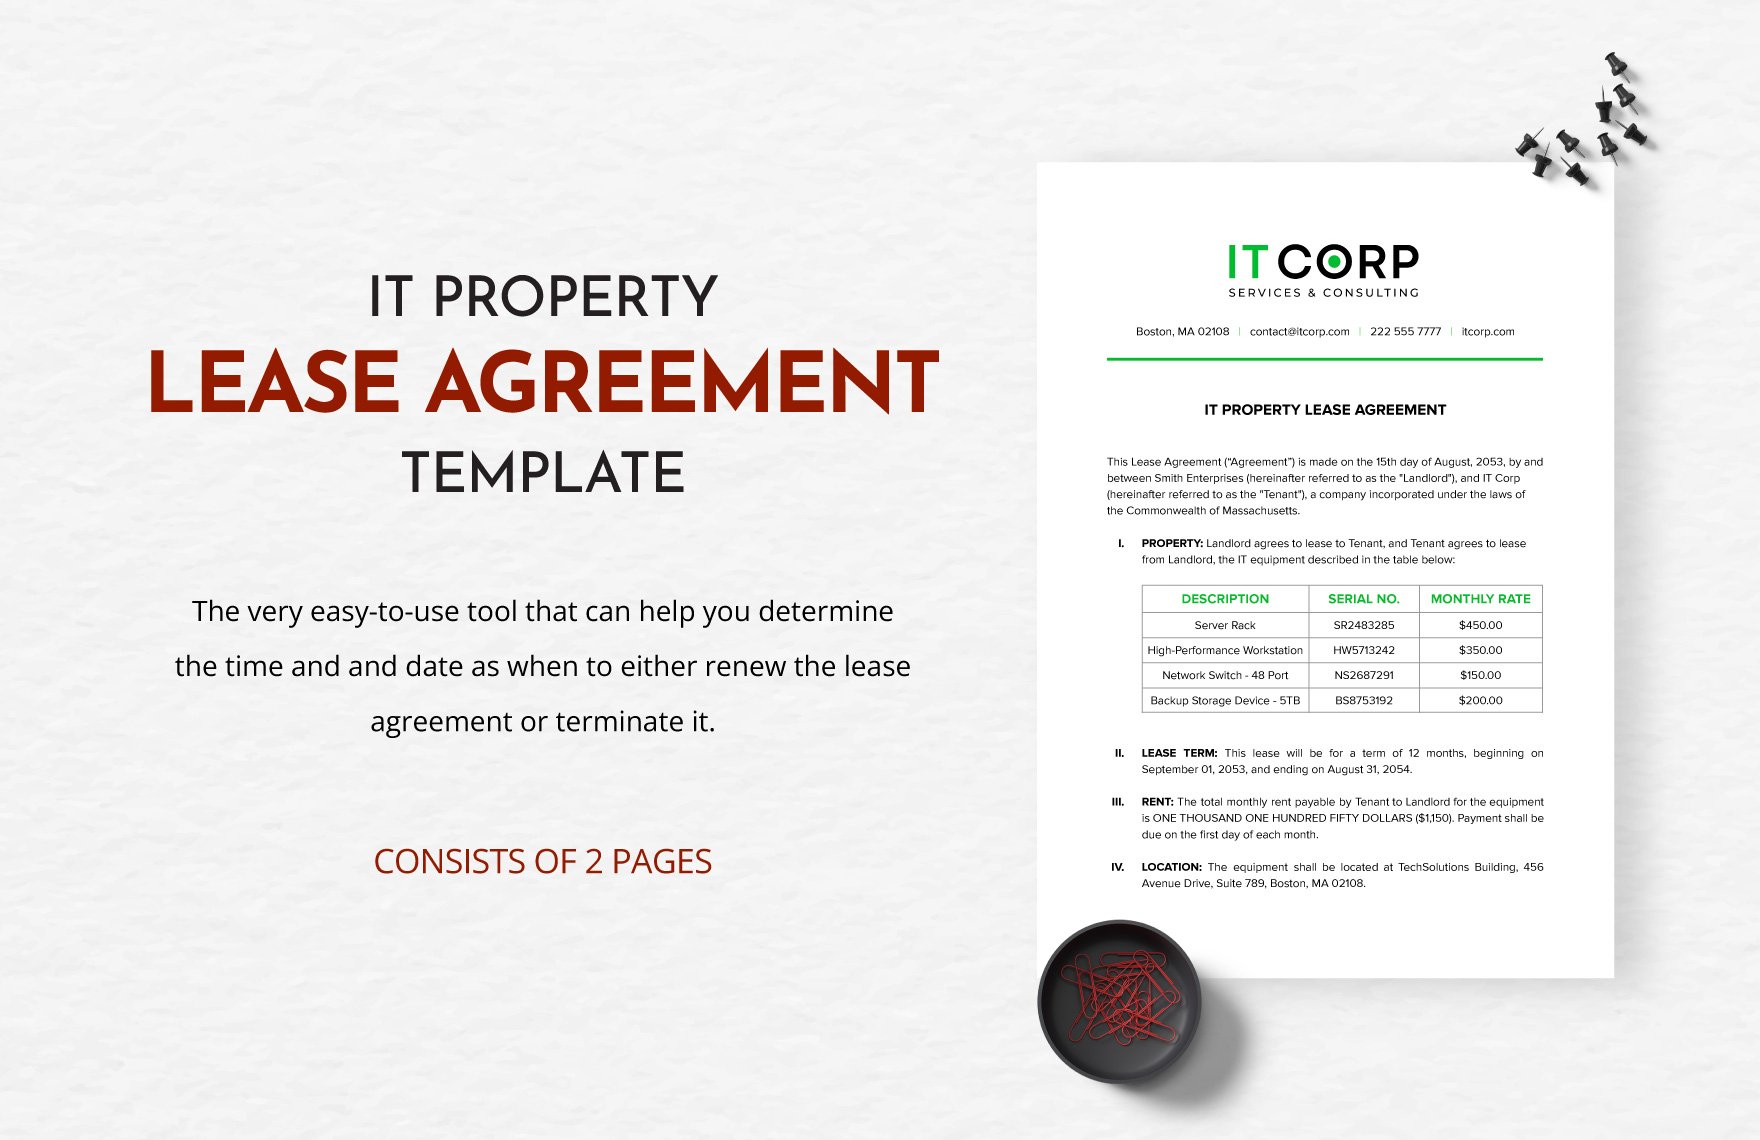 IT Property Lease Agreement Template